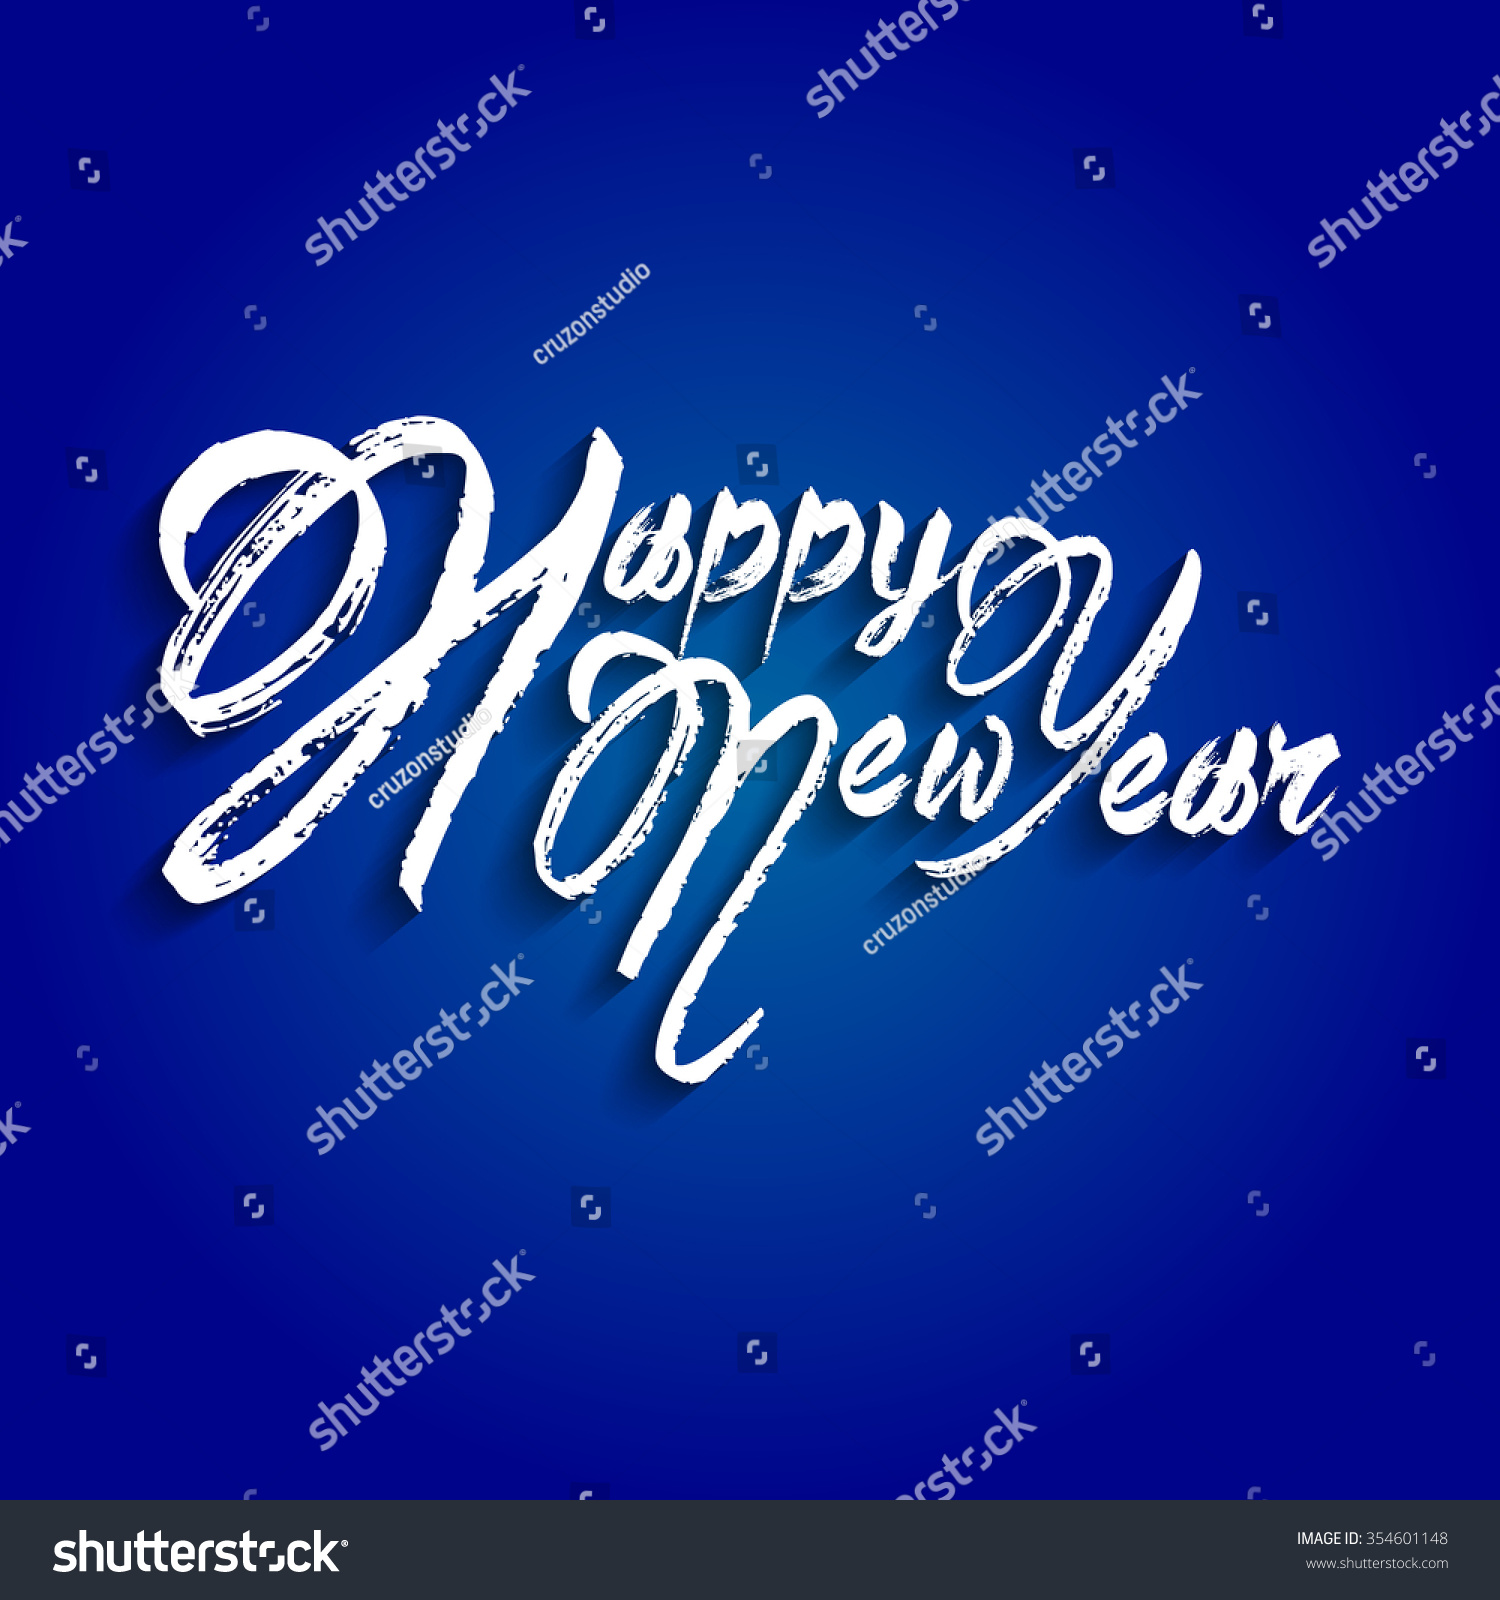 happy new year 2016, greeting or illustration with beautiful text for new year 2016. #354601148